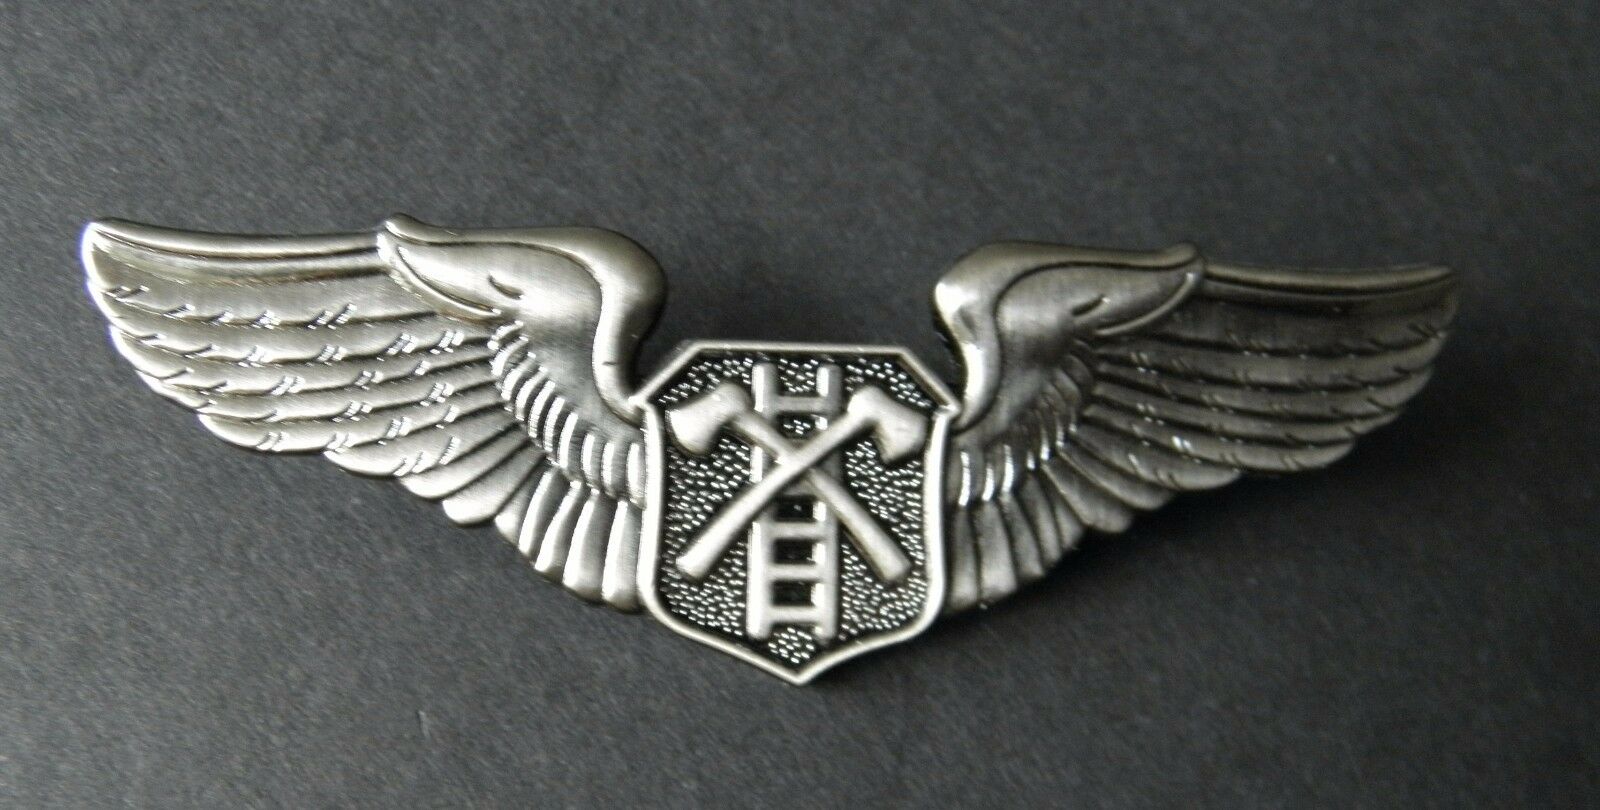 Details about   FIRE SERVICE AIR RESCUE WINGS FIREFIGHTER LAPEL PIN BADGE 1.2 INCHES 